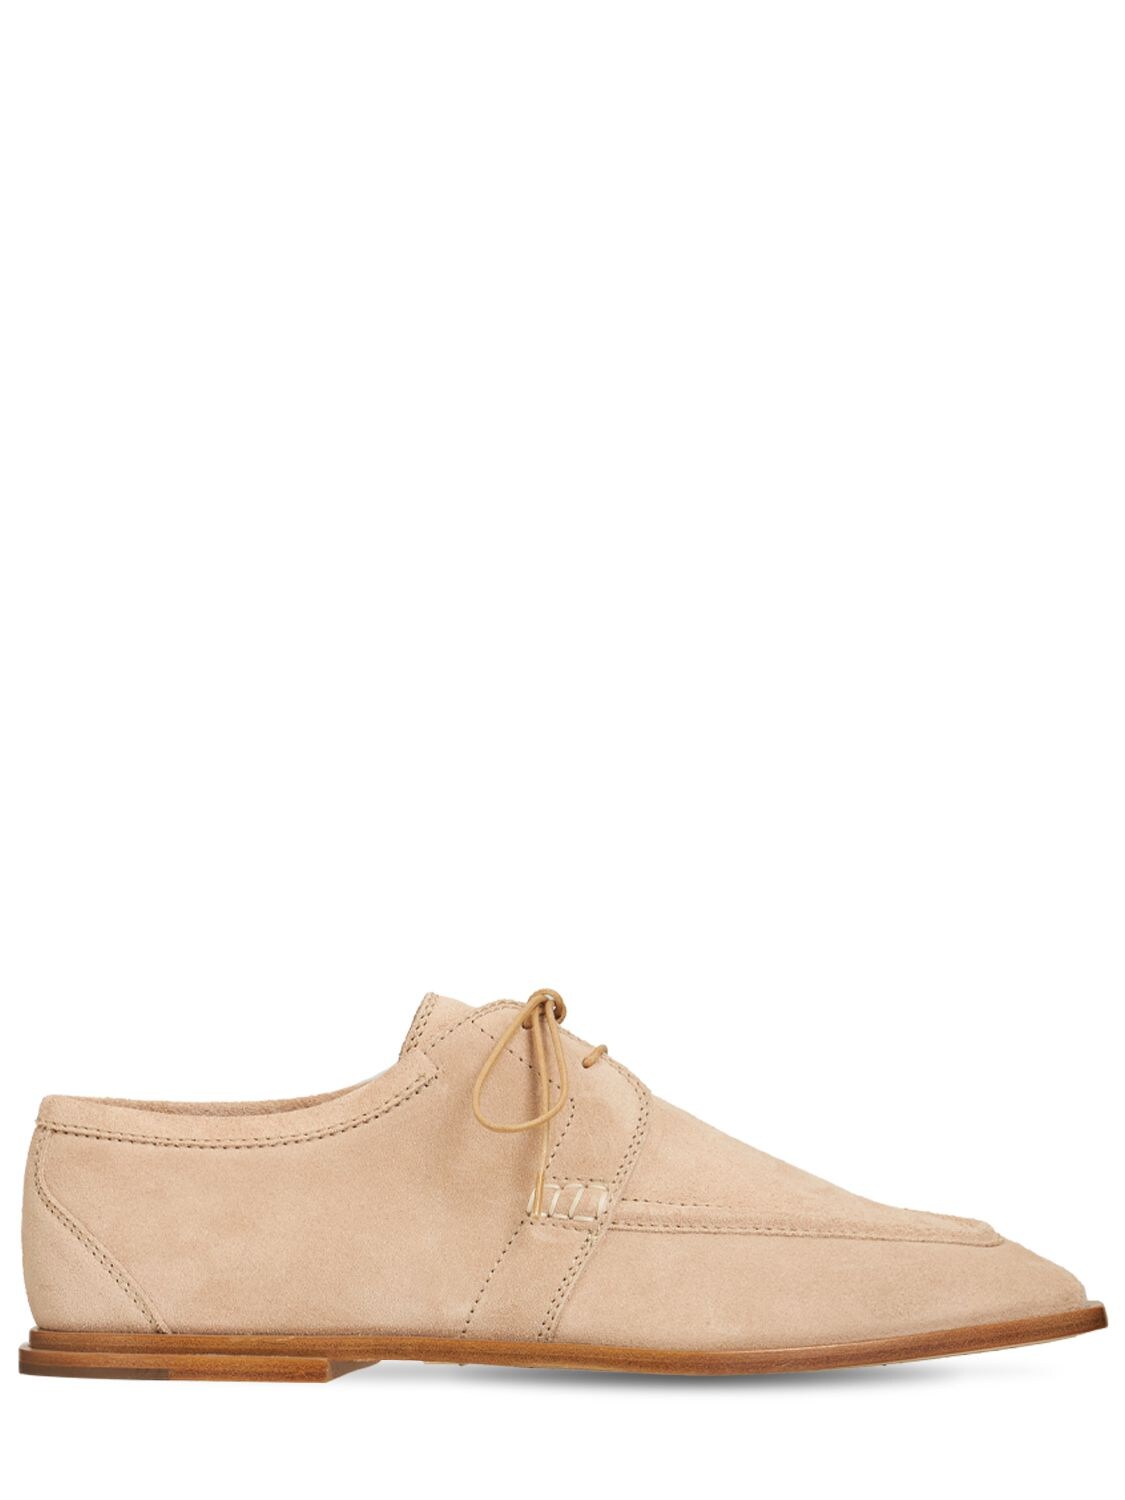 ZIMMERMANN 10mm Suede Lace-up Shoes